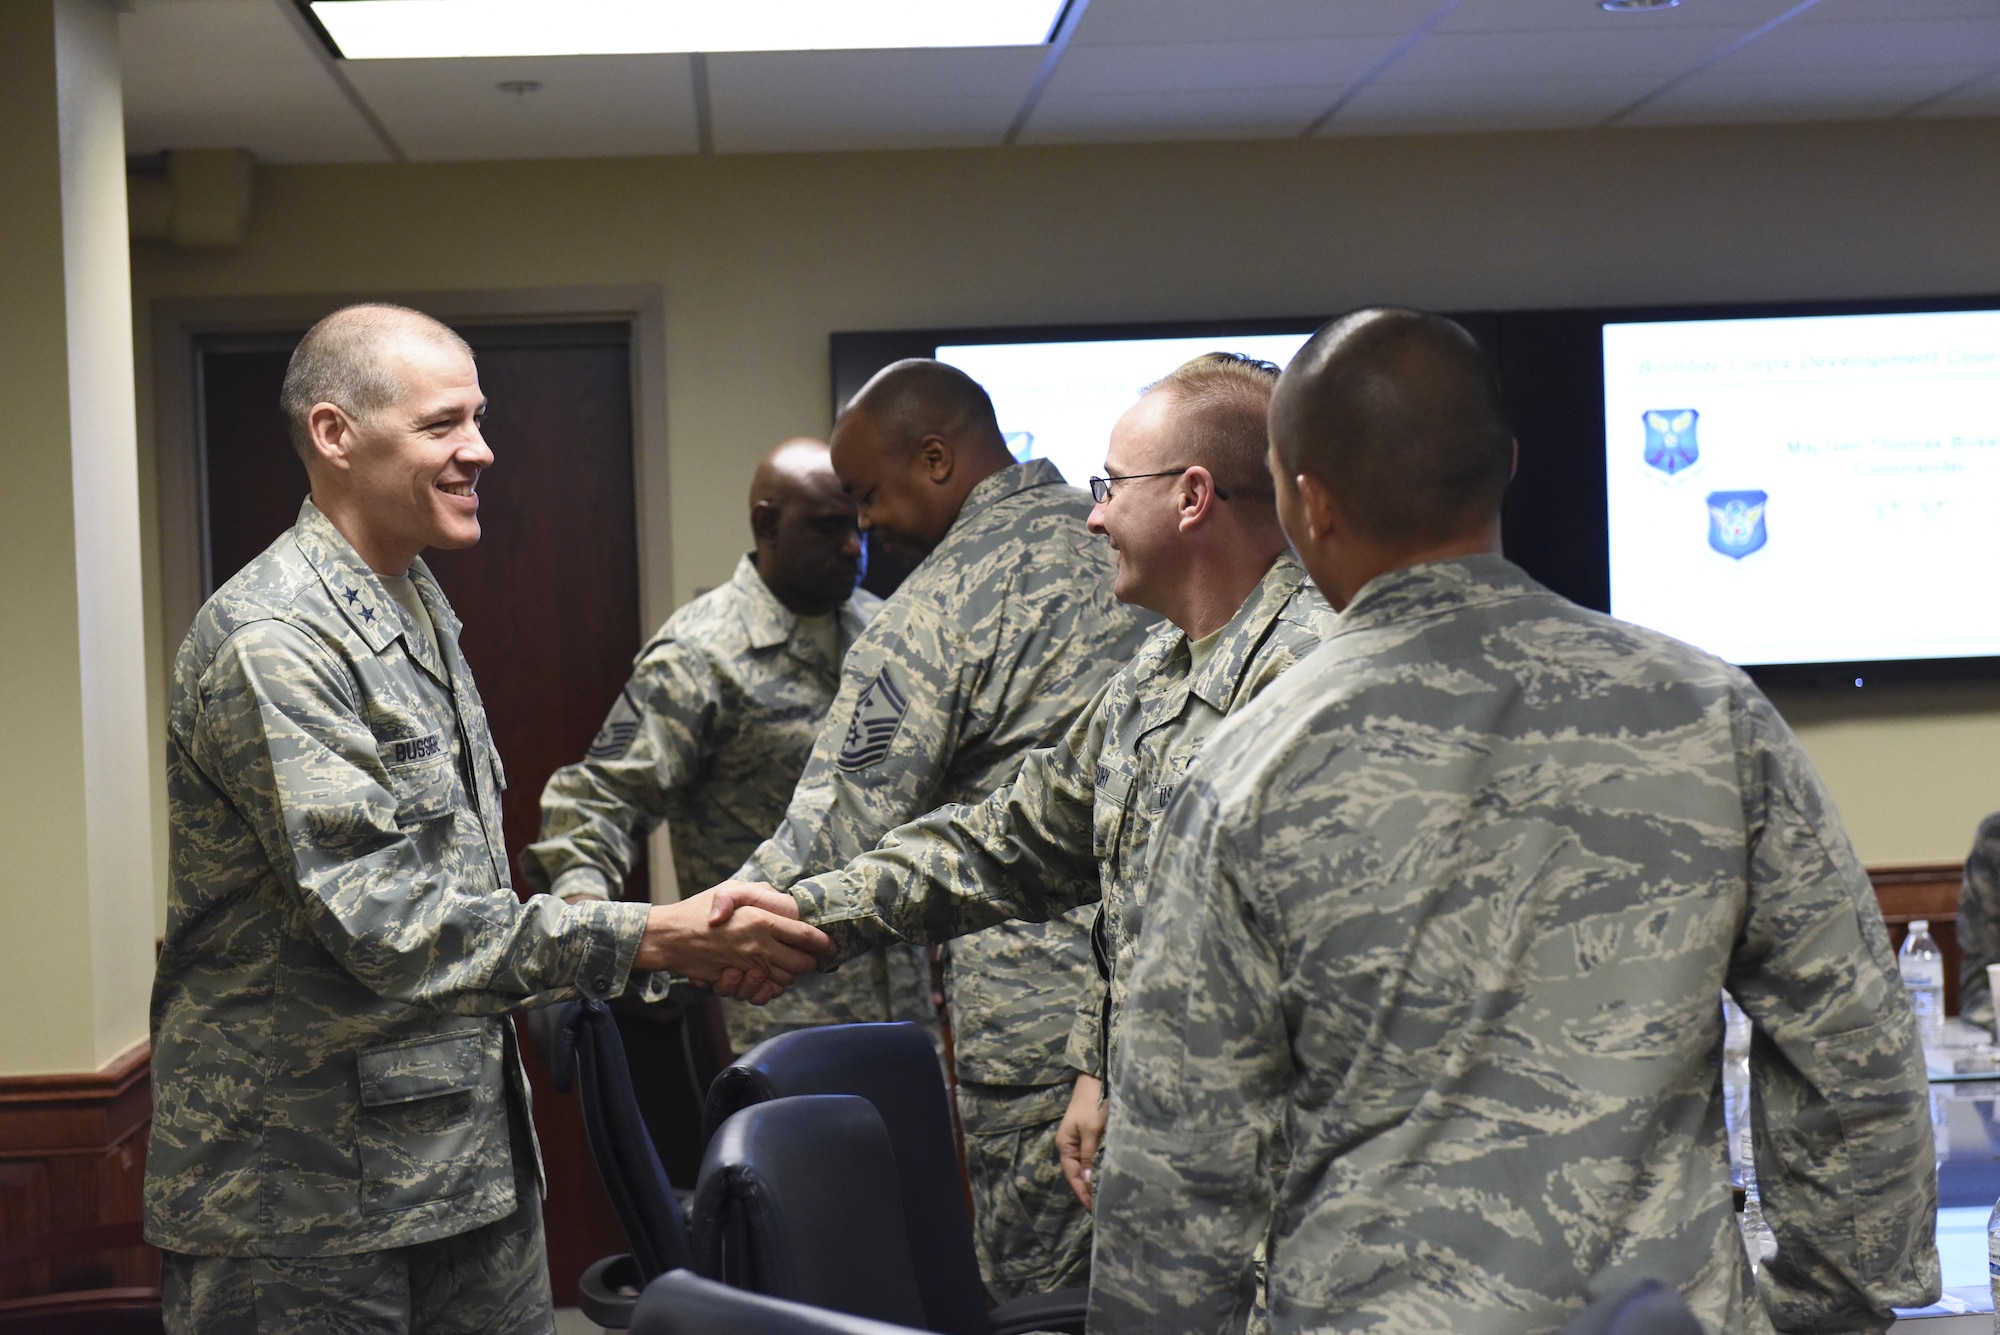 U.S. Air Force Maj. Gen. Thomas Bussiere, 8th Air Force commander, greets Airmen attending a Bomber Corps Development Course at Barksdale Air Force Base, La., Nov. 17, 2016. The Airmen in attendance came to Barksdale from various Air Force Global Strike Command bases to enhance their understanding of the multifaceted 8th Air Force mission, heritage, culture and more. Courses are held to further assist educating flight and squadron level leaders about the 8th Air Force mission. (U.S. Air Force photo/Airman Alexis Schultz)